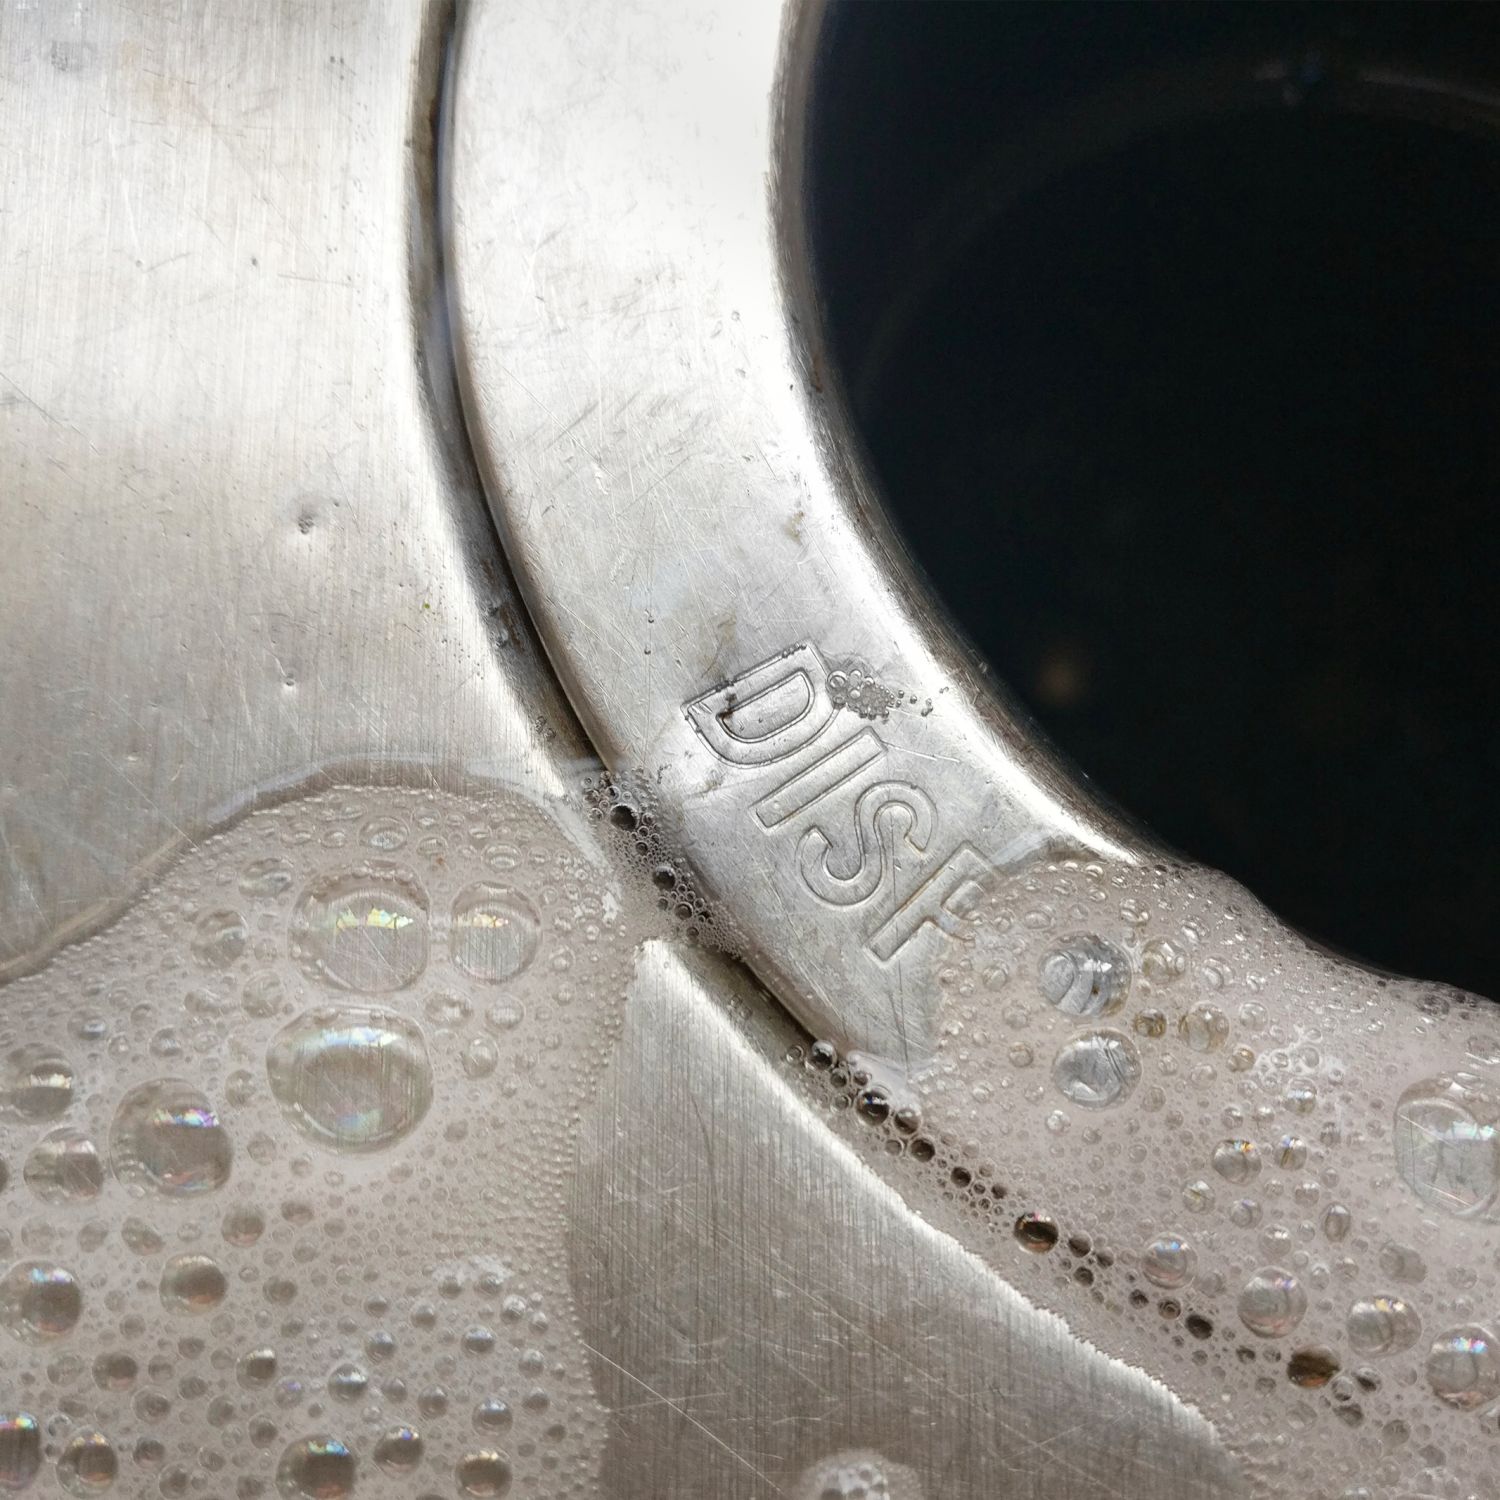 Closeup of a garbage disposal in a kitchen sink